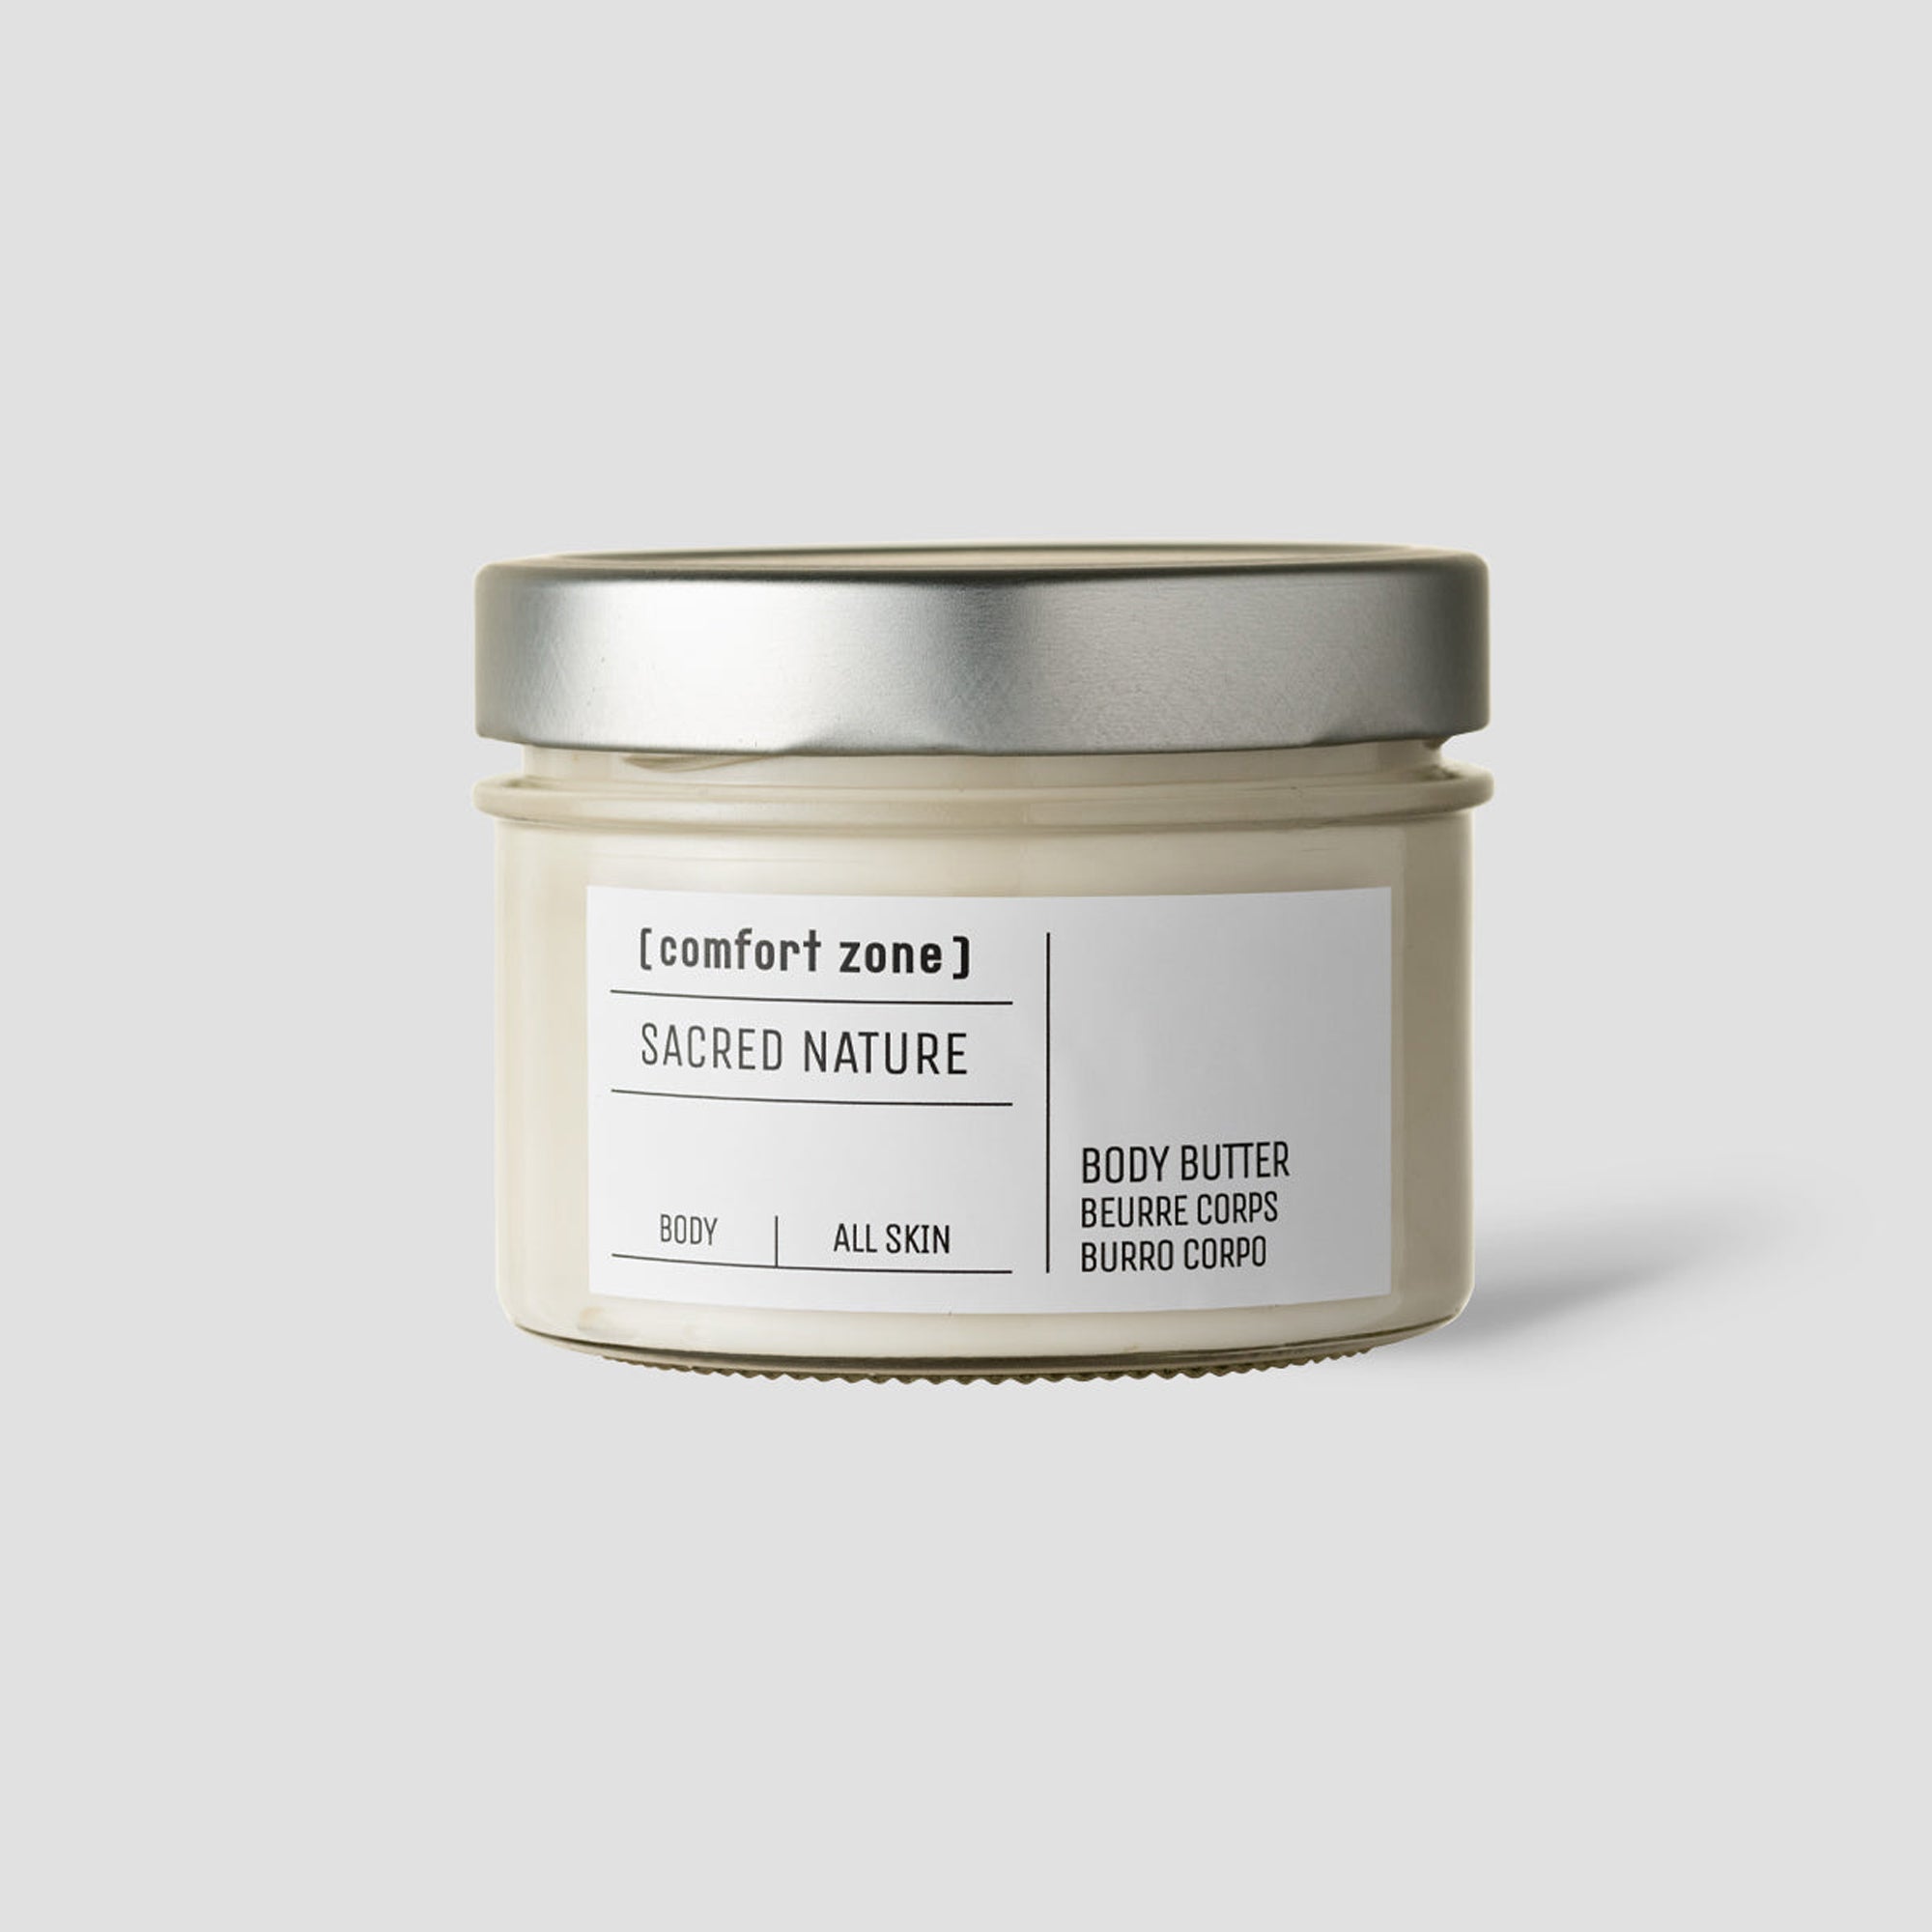 Sacred Nature Body Butter (Organic Body Butter) - 220ml - [ comfort zone ]